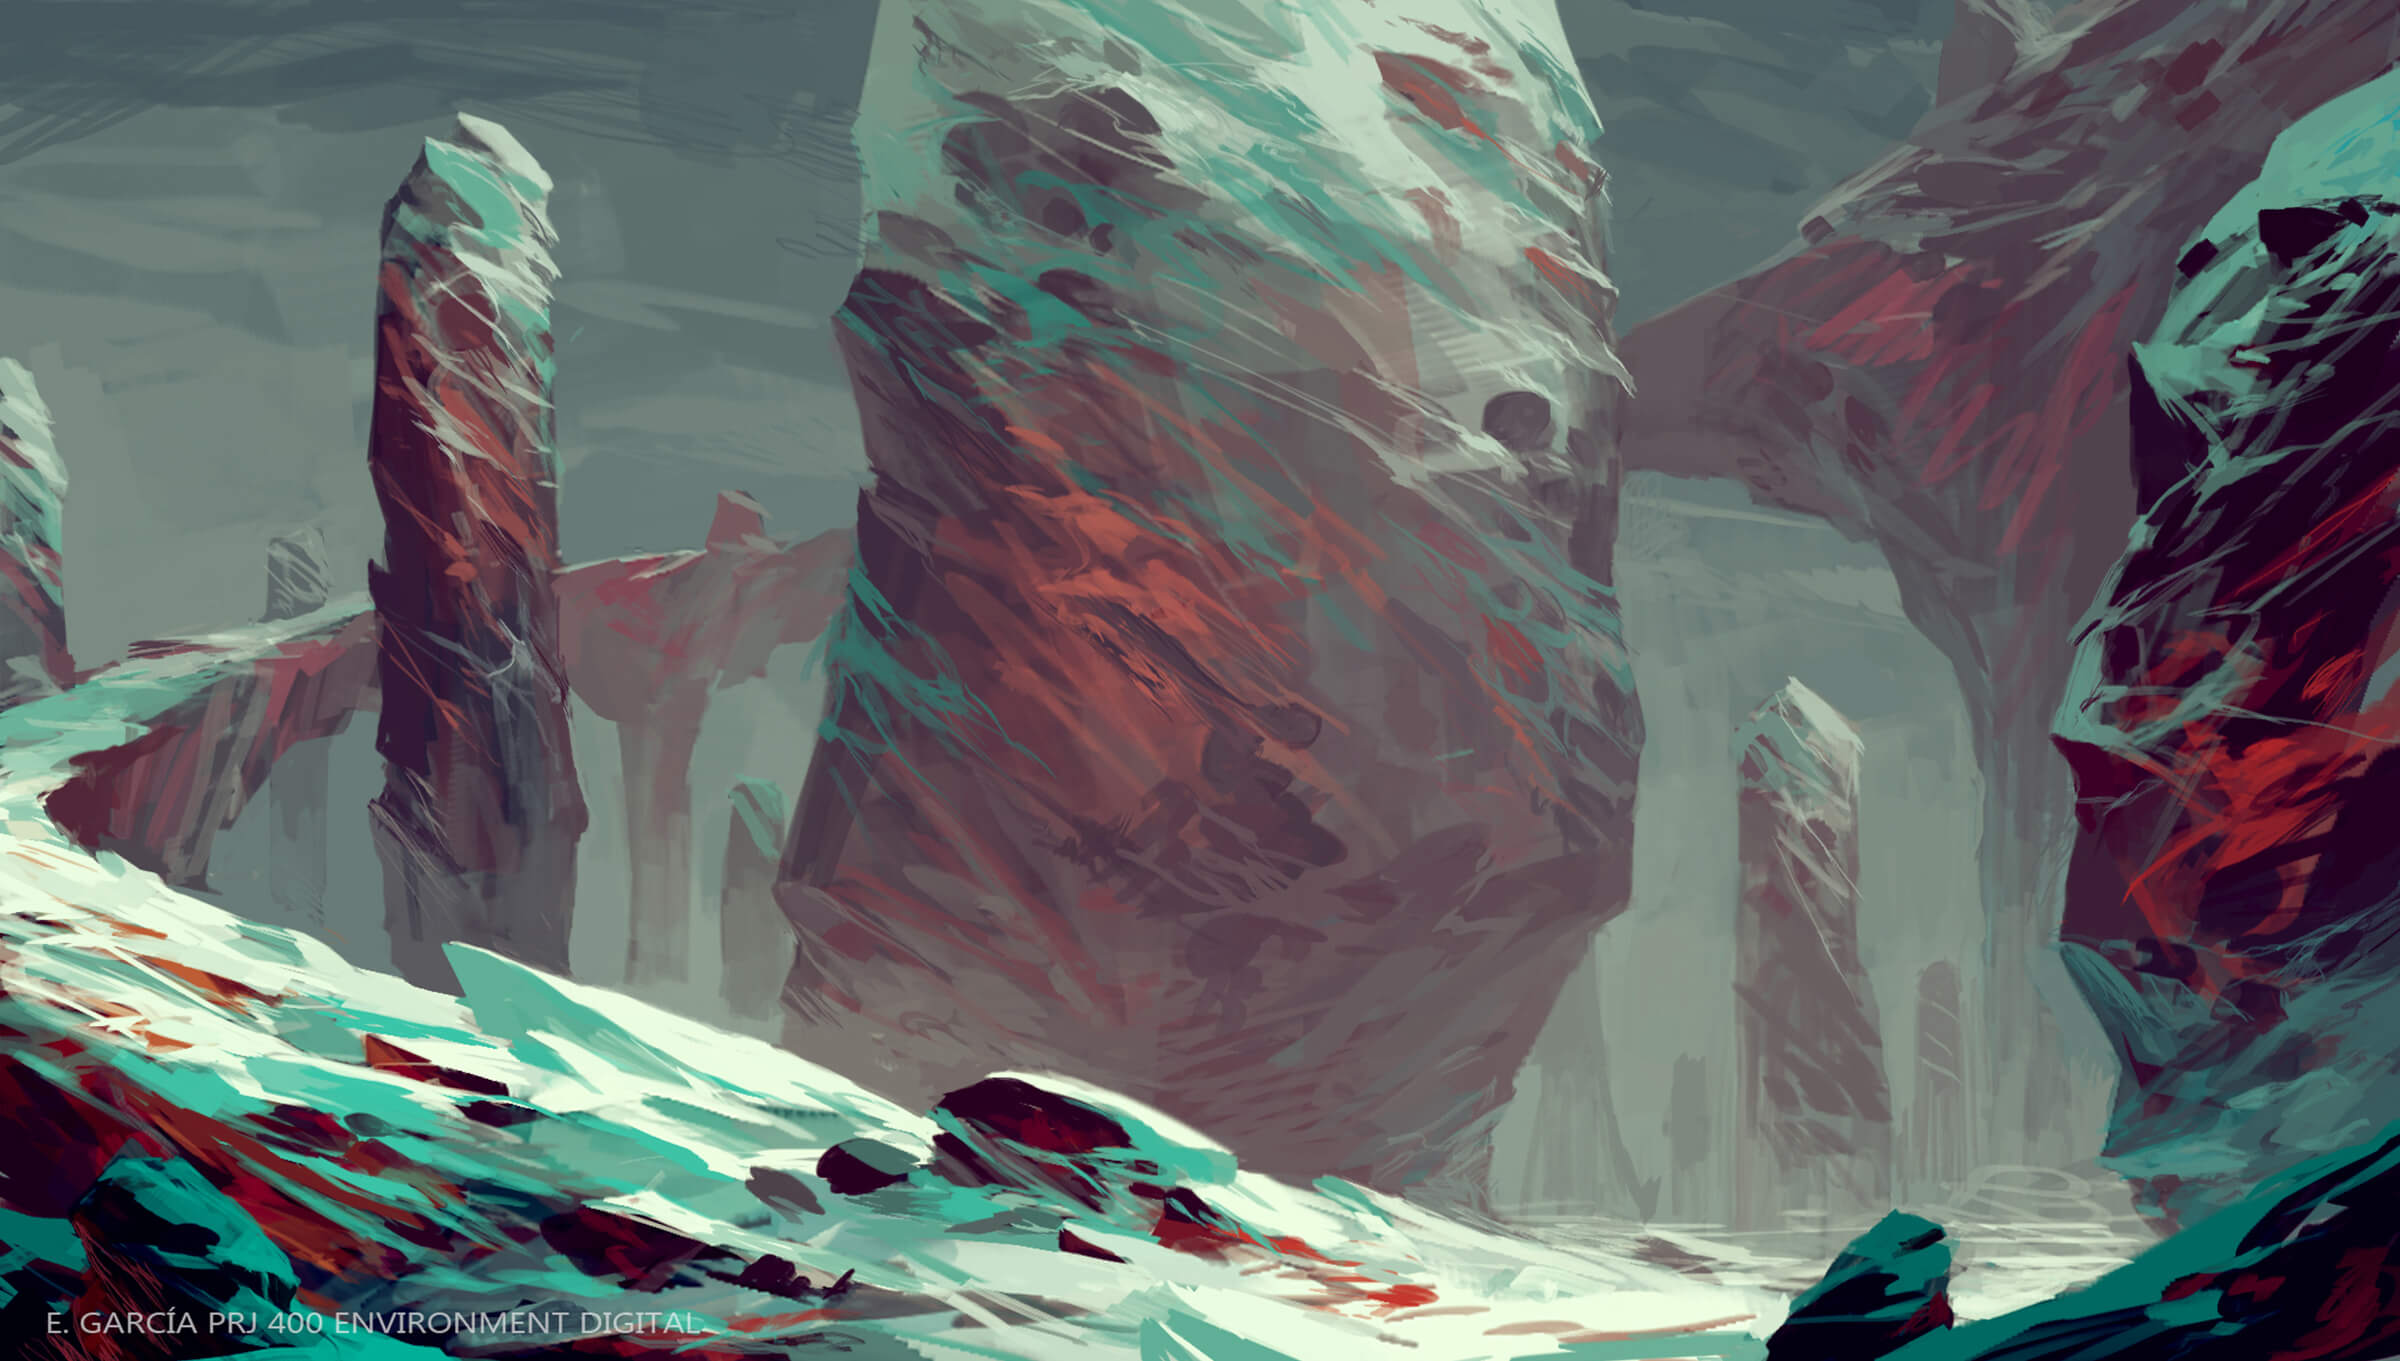 A rocky environment with snow-capped outcroppings dominated by color tones of white, blue, and red.